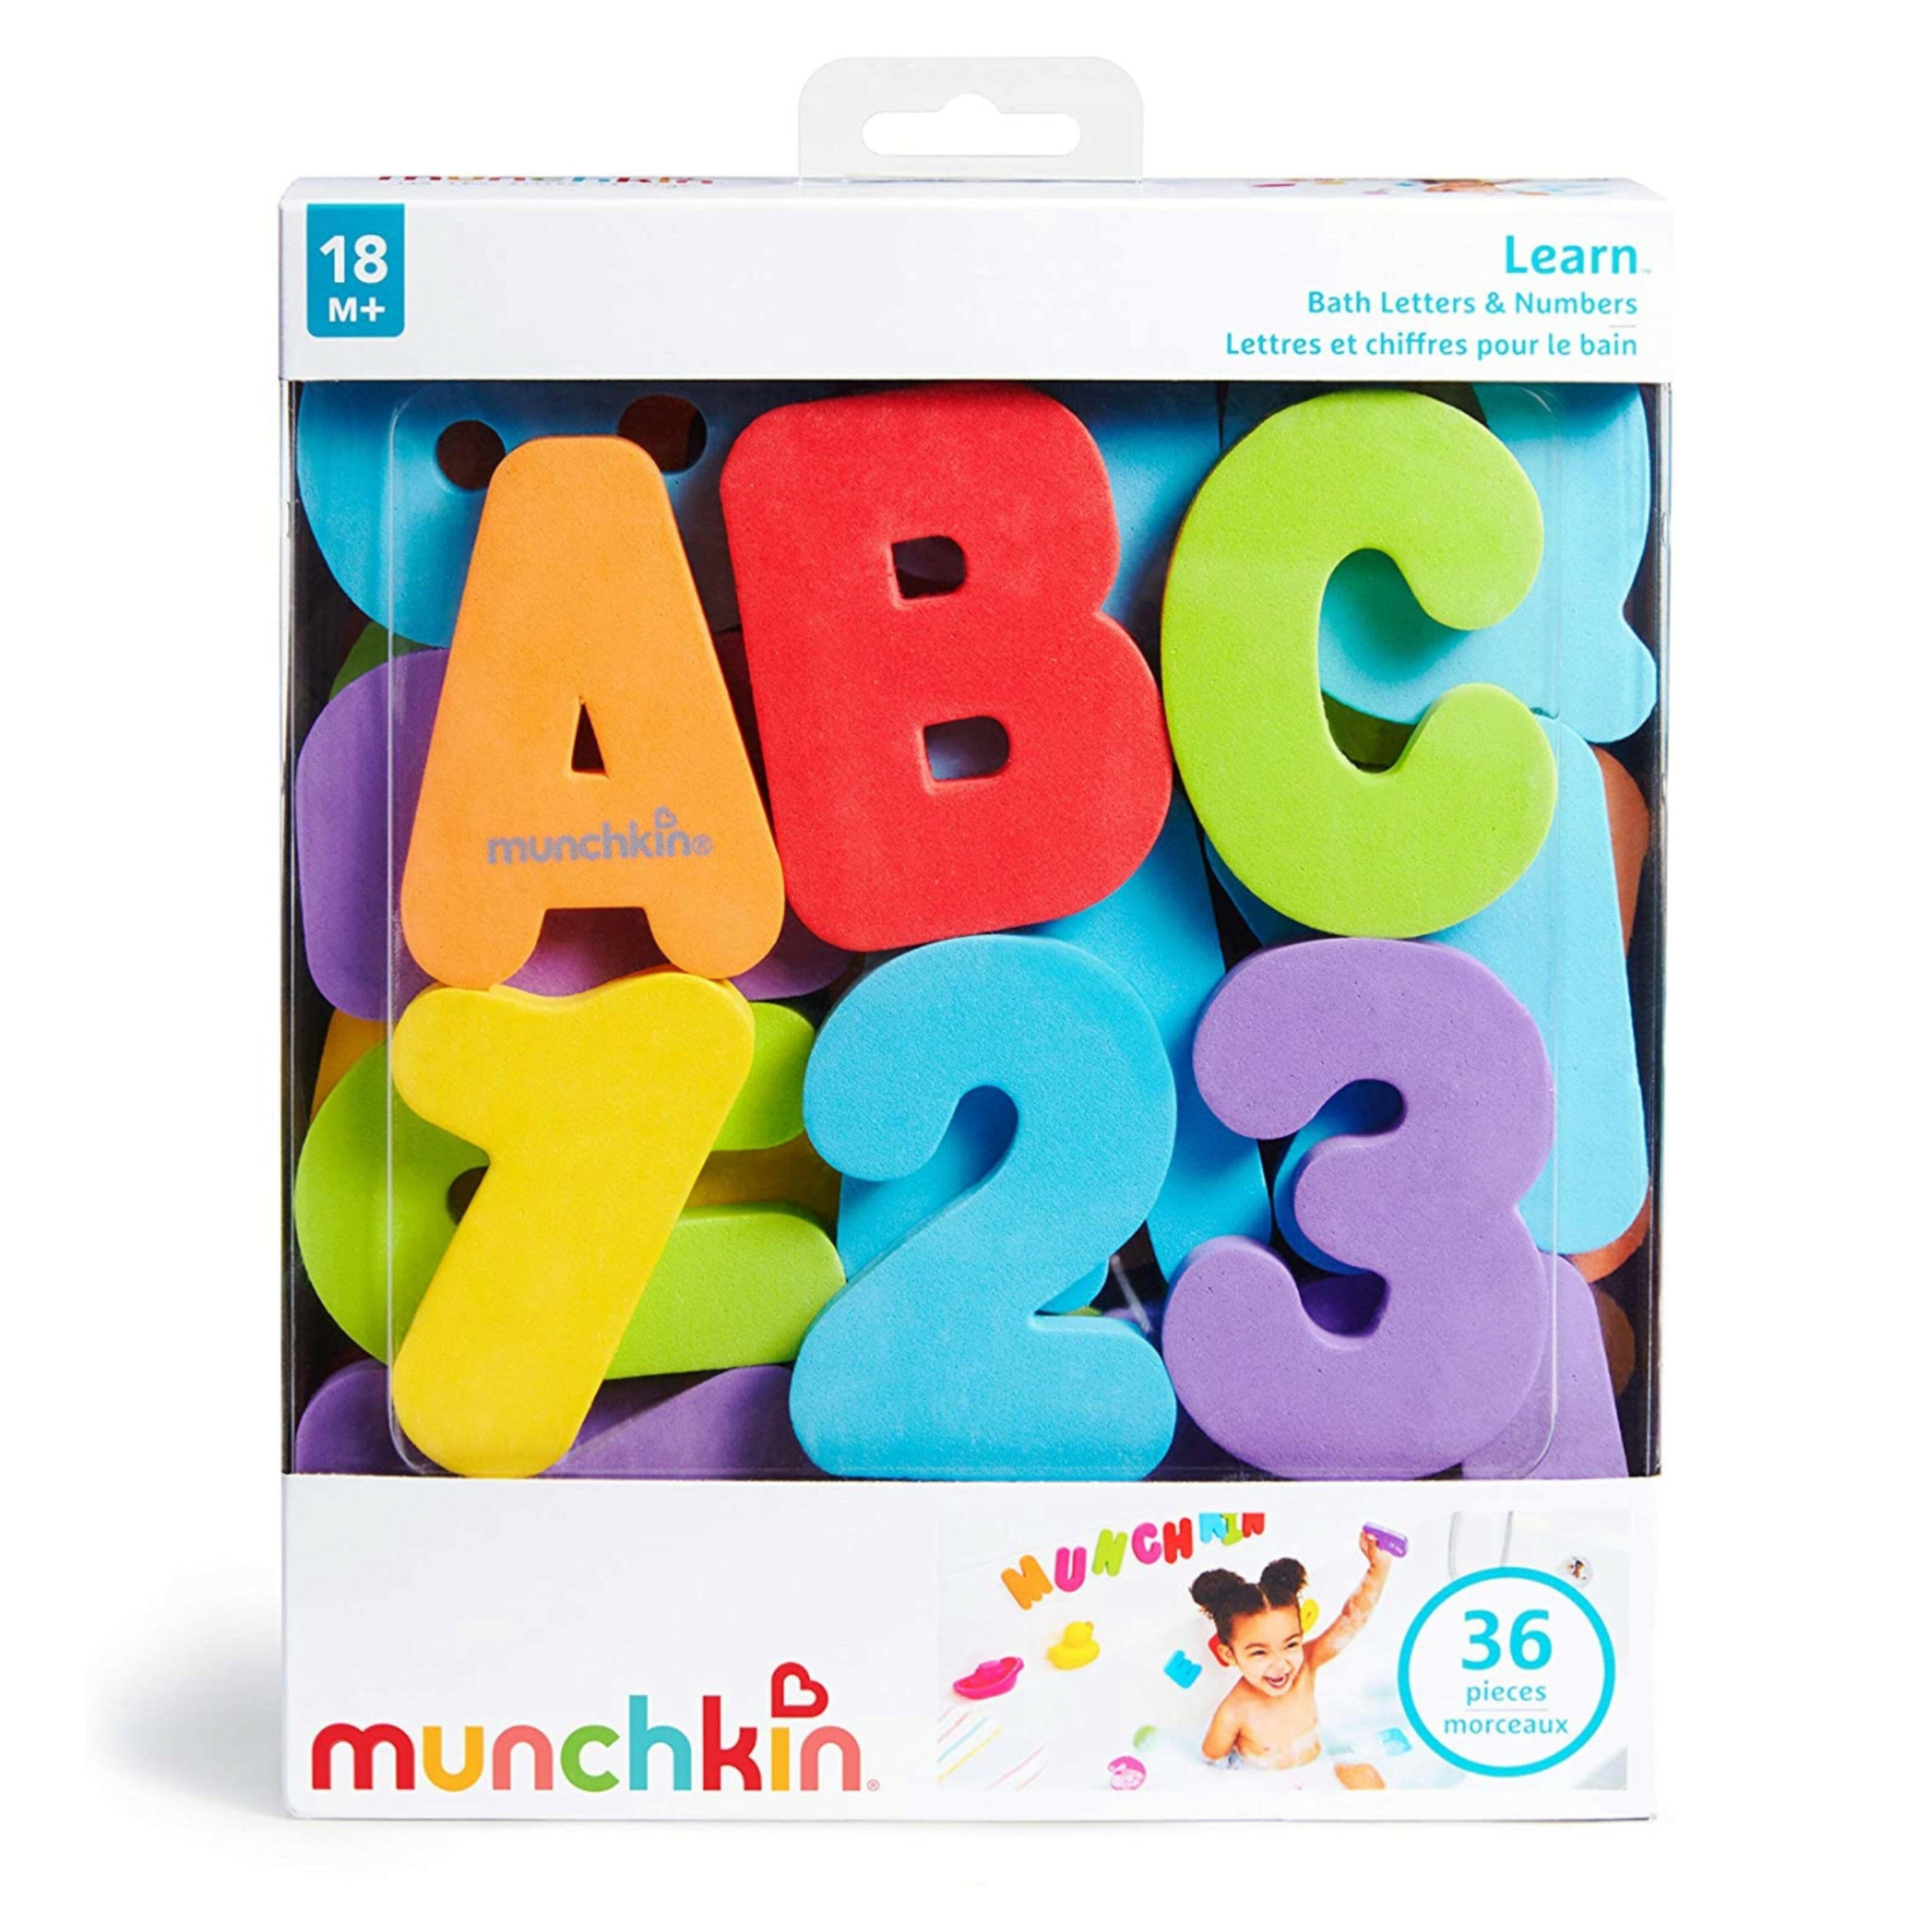 Munchkin 36 Bath Letters and Numbers.